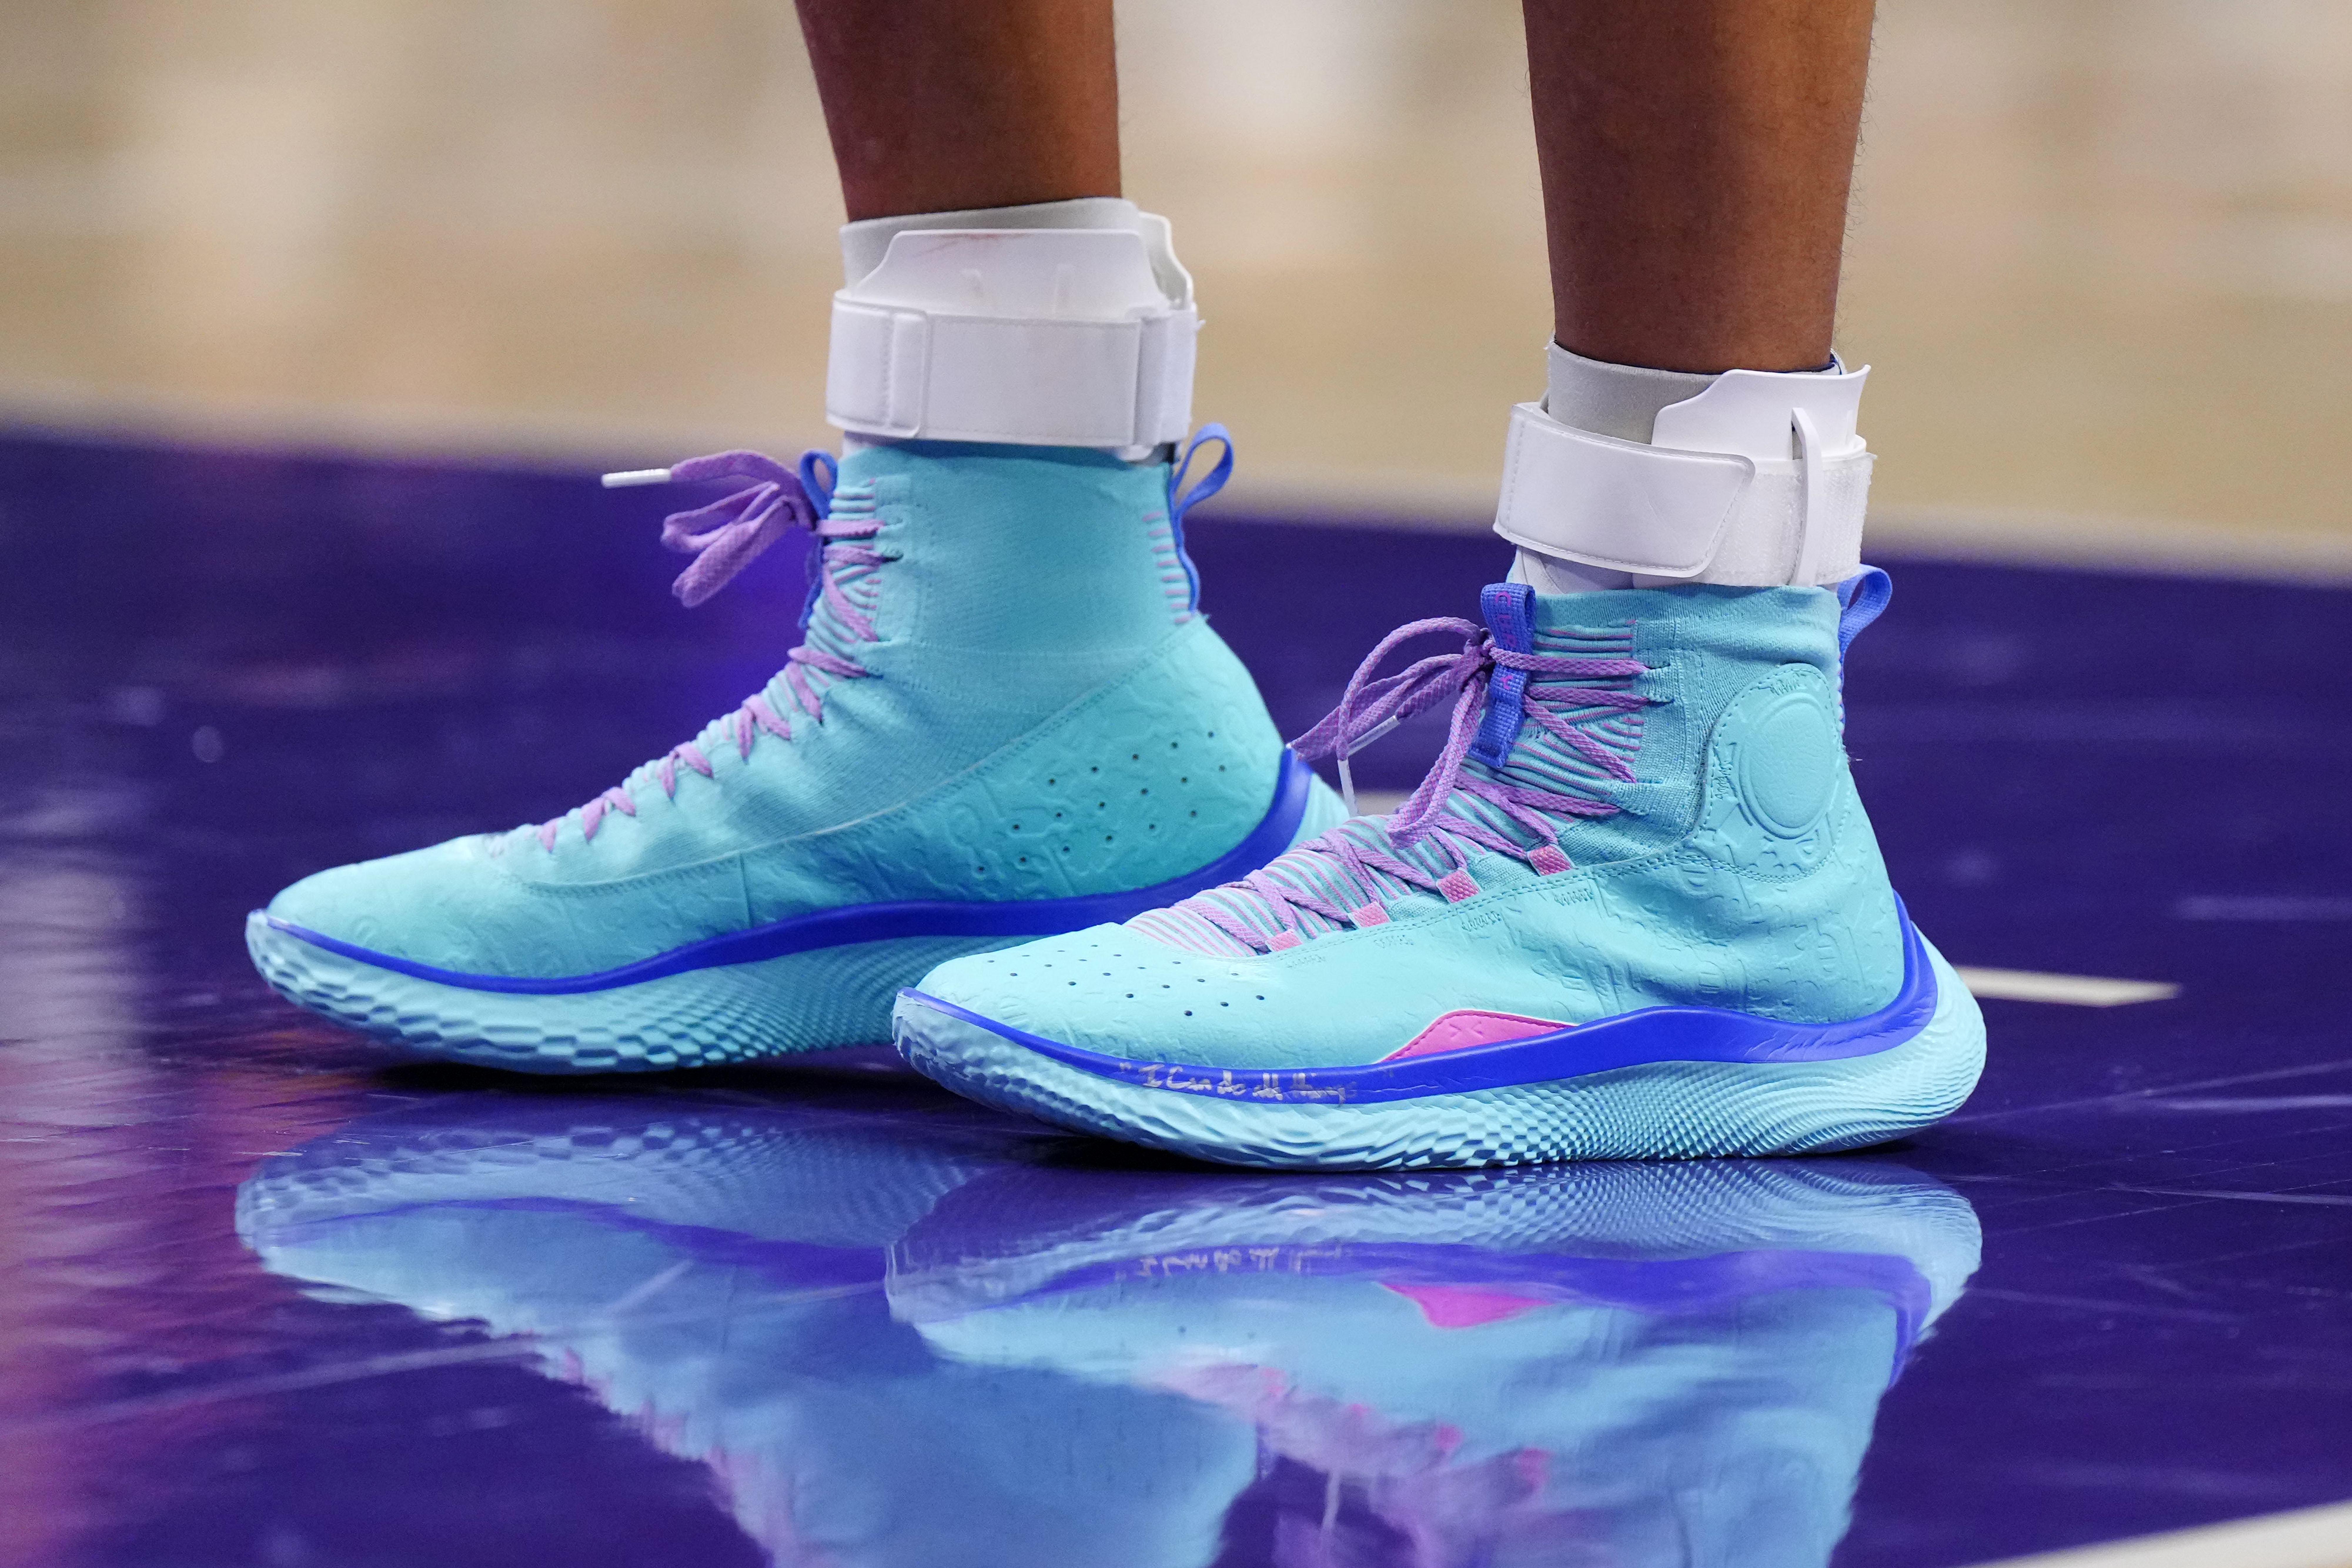 Golden State Warriors guard Stephen Curry's teal and purple sneakers.